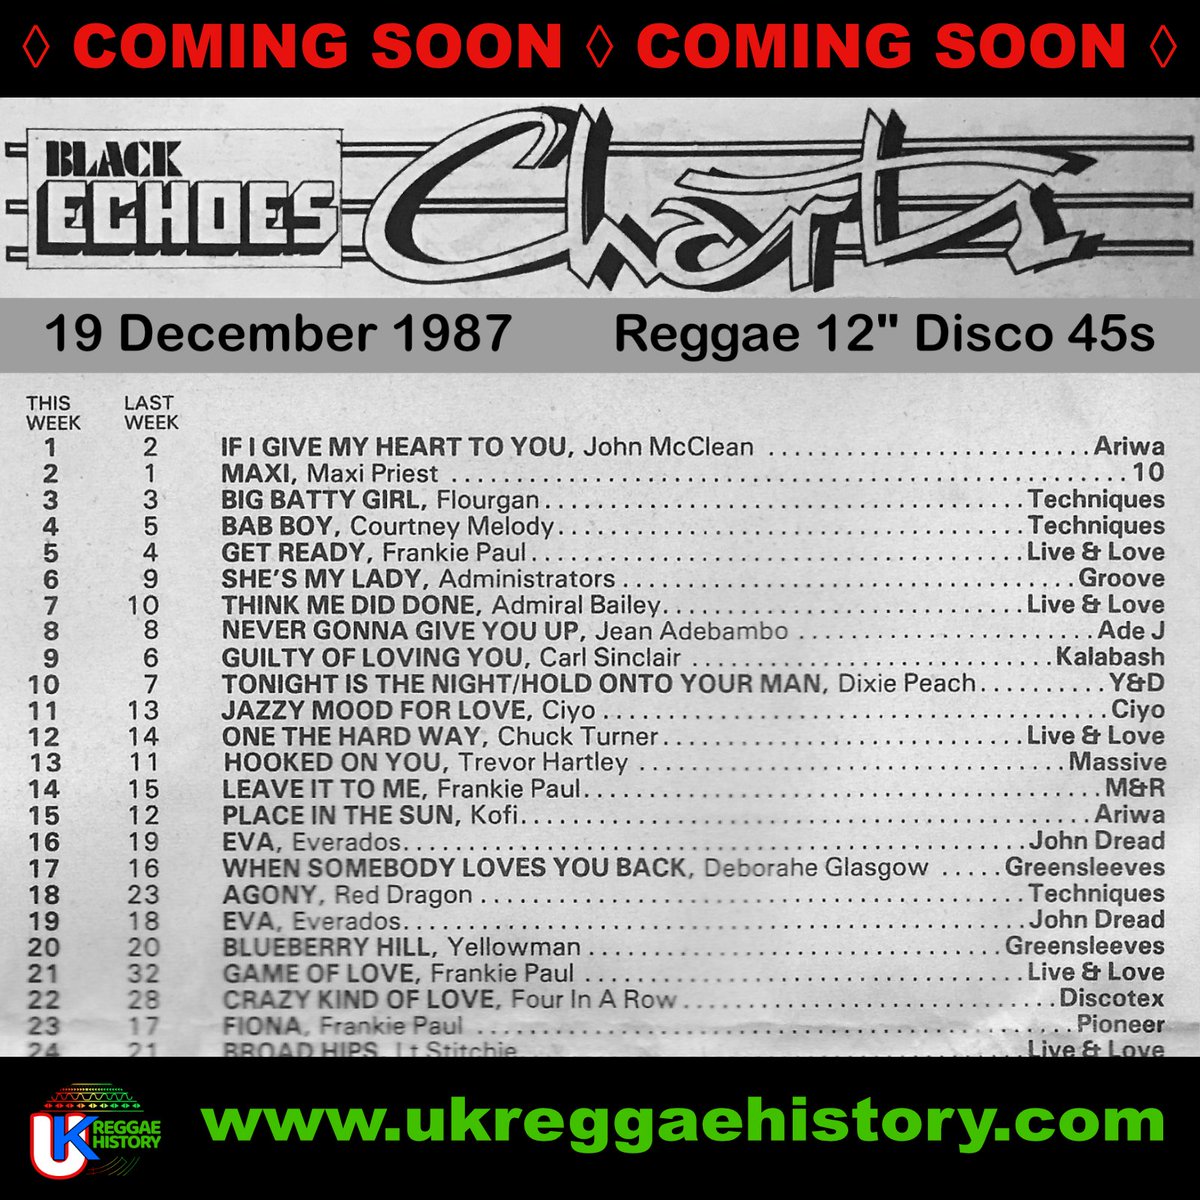 Black Echoes Reggae Charts from 1976 to 1989 coming soon to ukreggaehistory.com